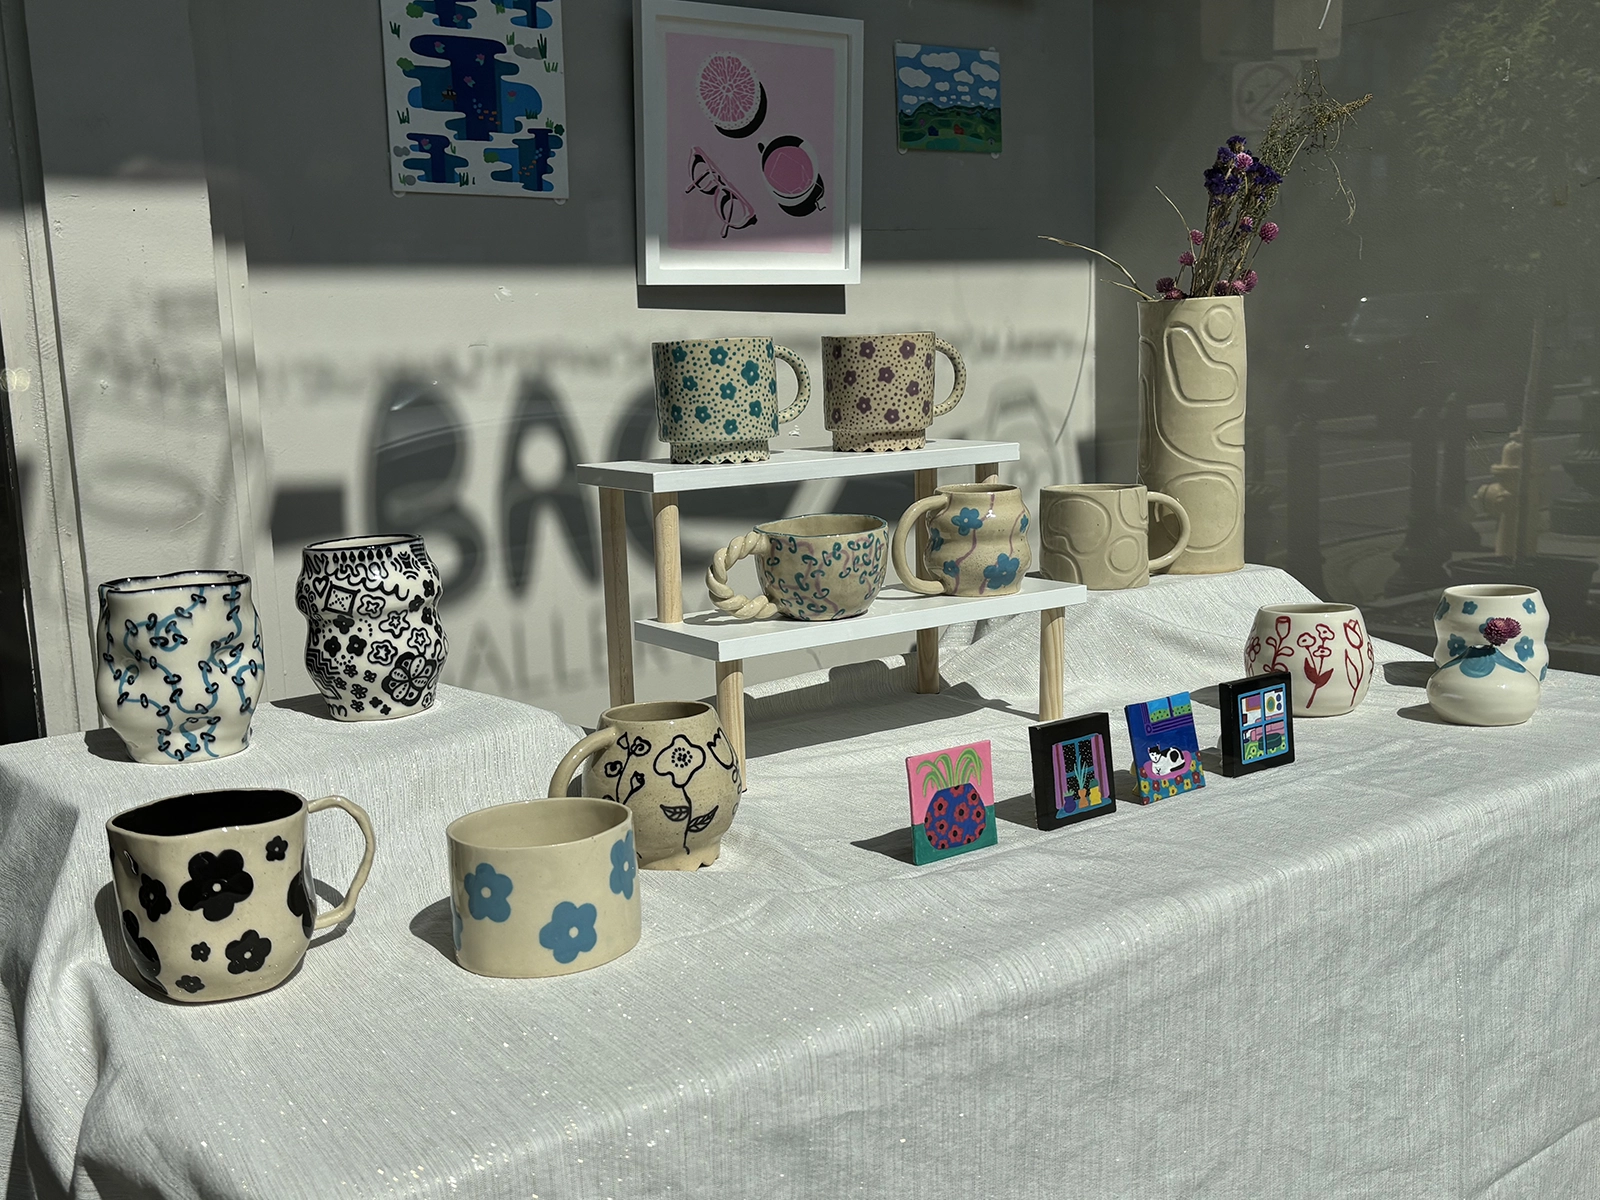 A display of handcrafted pottery by Abby Klein, featuring a variety of mugs and vases adorned with whimsical and intricate patterns. The pottery pieces are arranged on a white cloth-covered table, with some elevated on a small wooden shelf. The designs include blue and black floral motifs, red abstract patterns, and other decorative elements. Small framed artworks and a vase with dried flowers add to the artistic presentation. Sunlight casts shadows and reflections, enhancing the vibrant and creative atmosphere of the display.